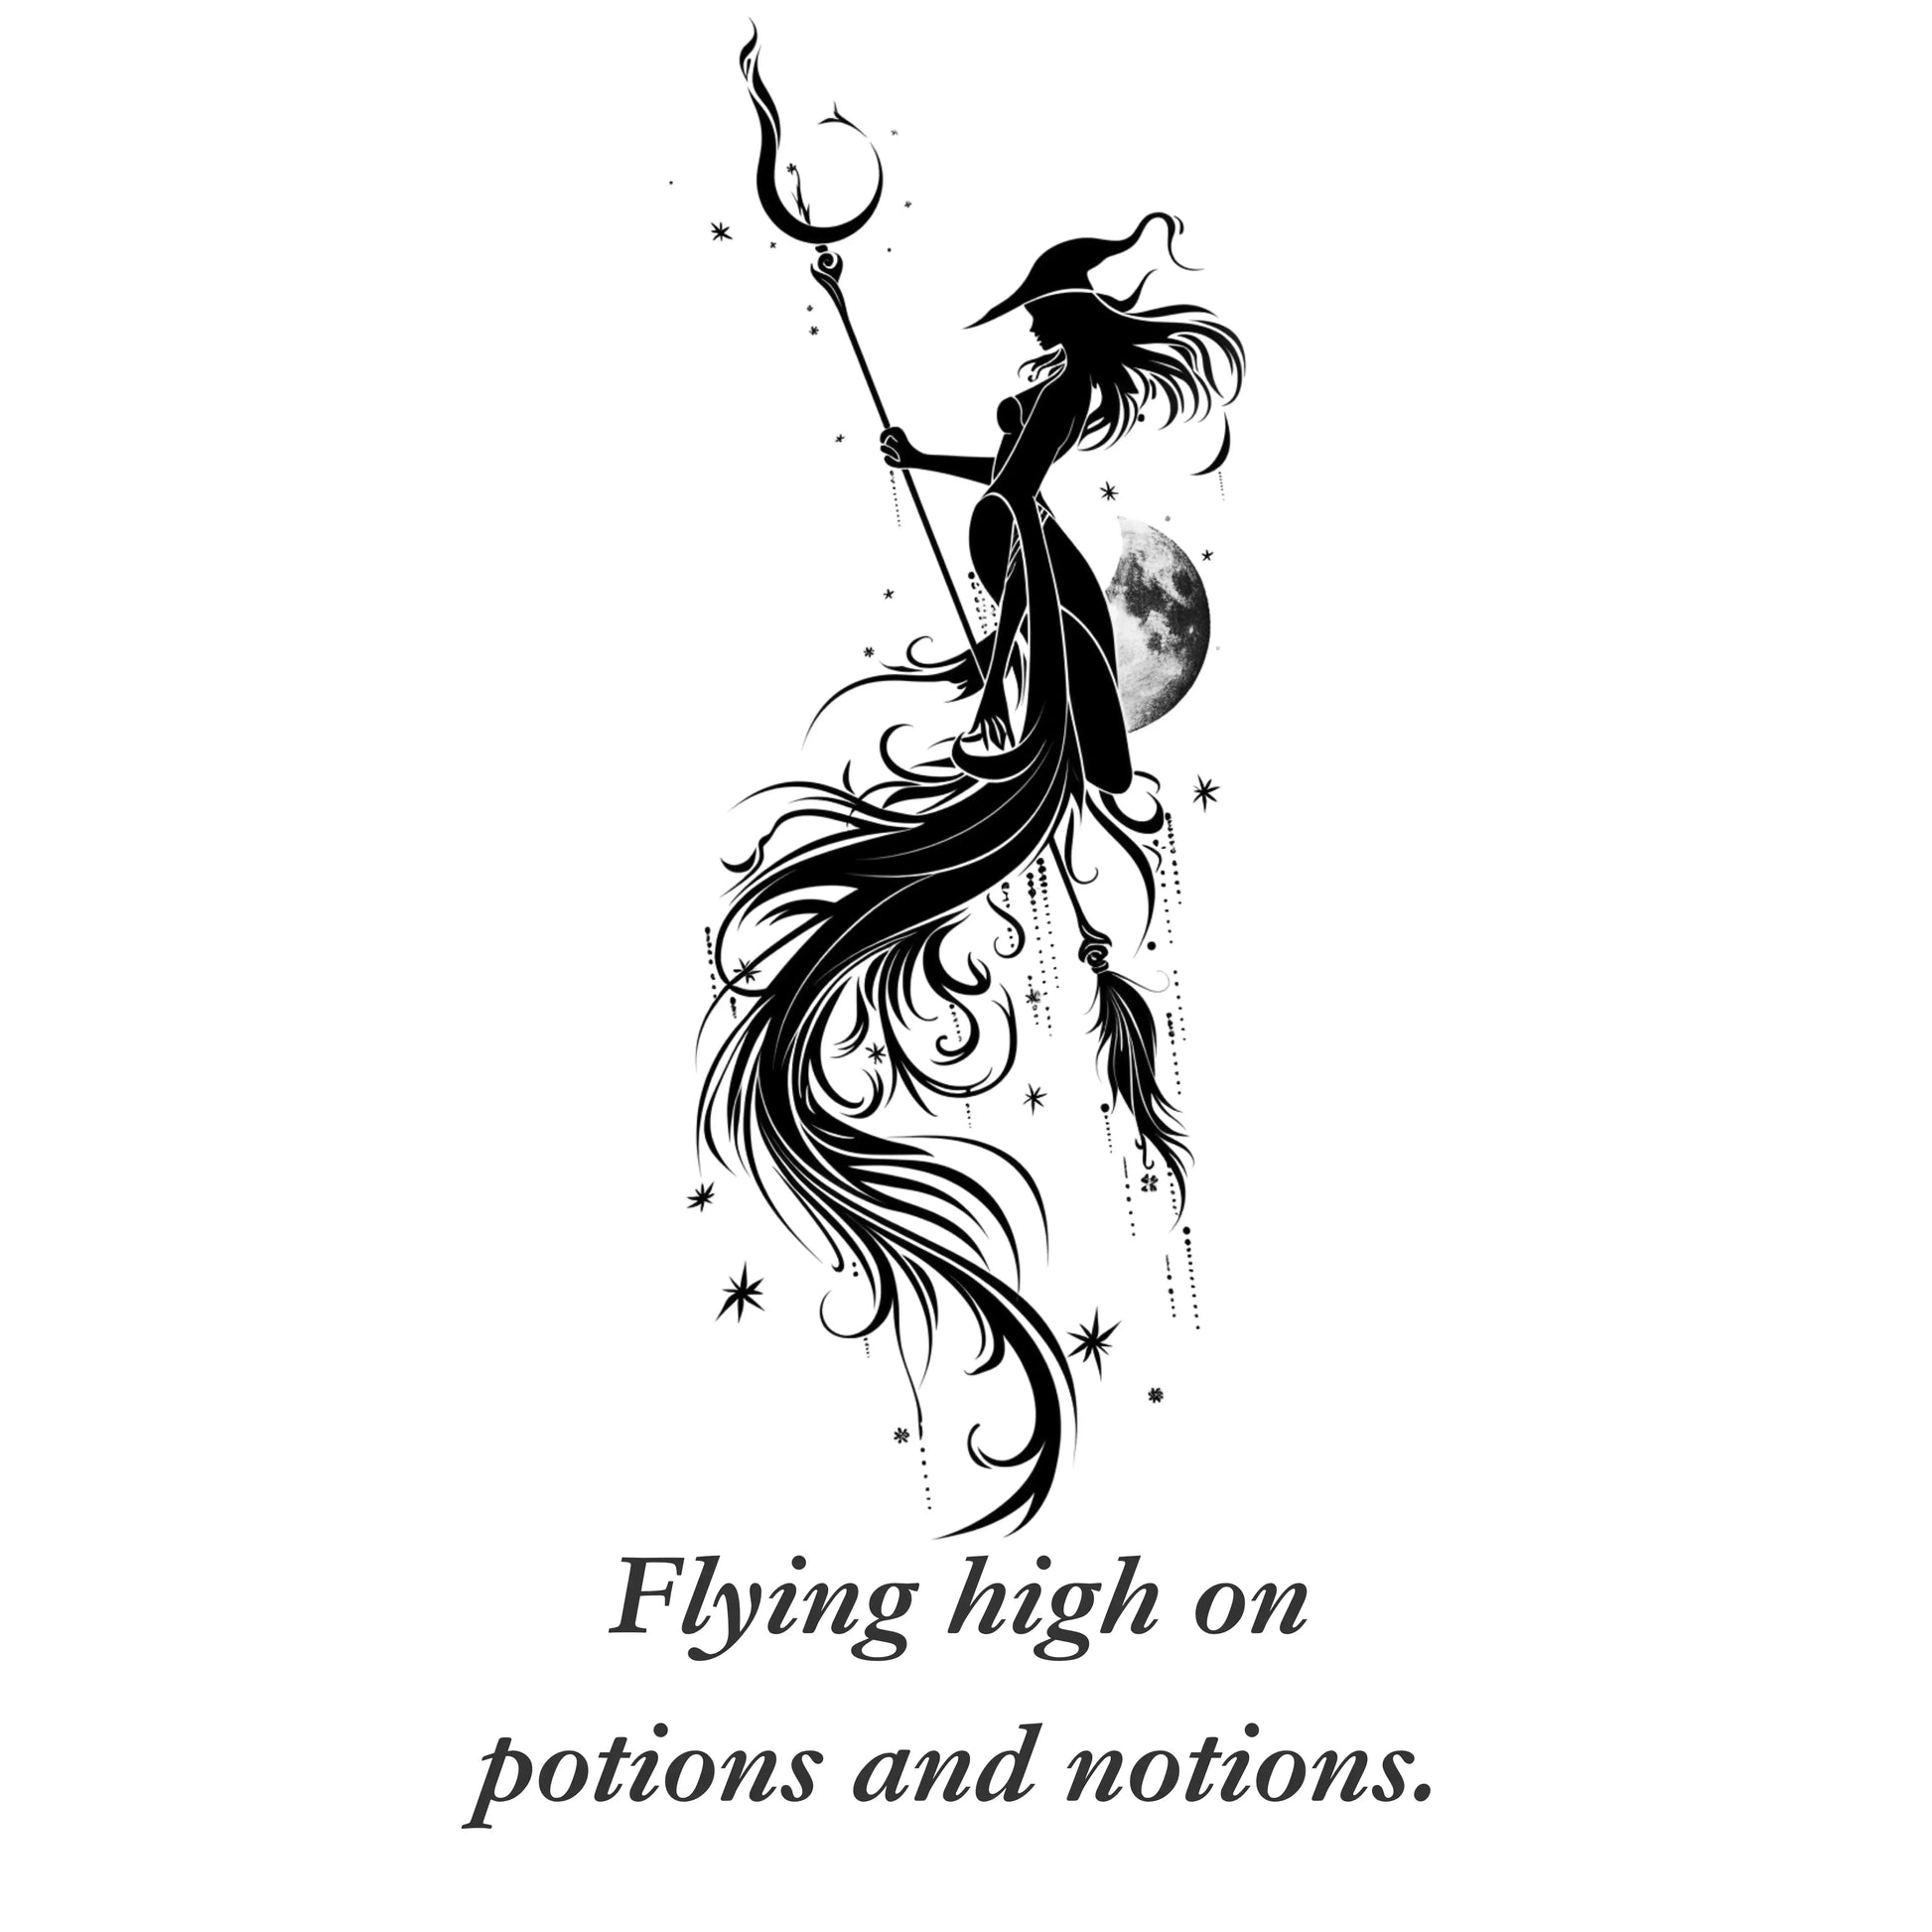 Flying high on Potions and notions graphic design from Blk Moon Shop.